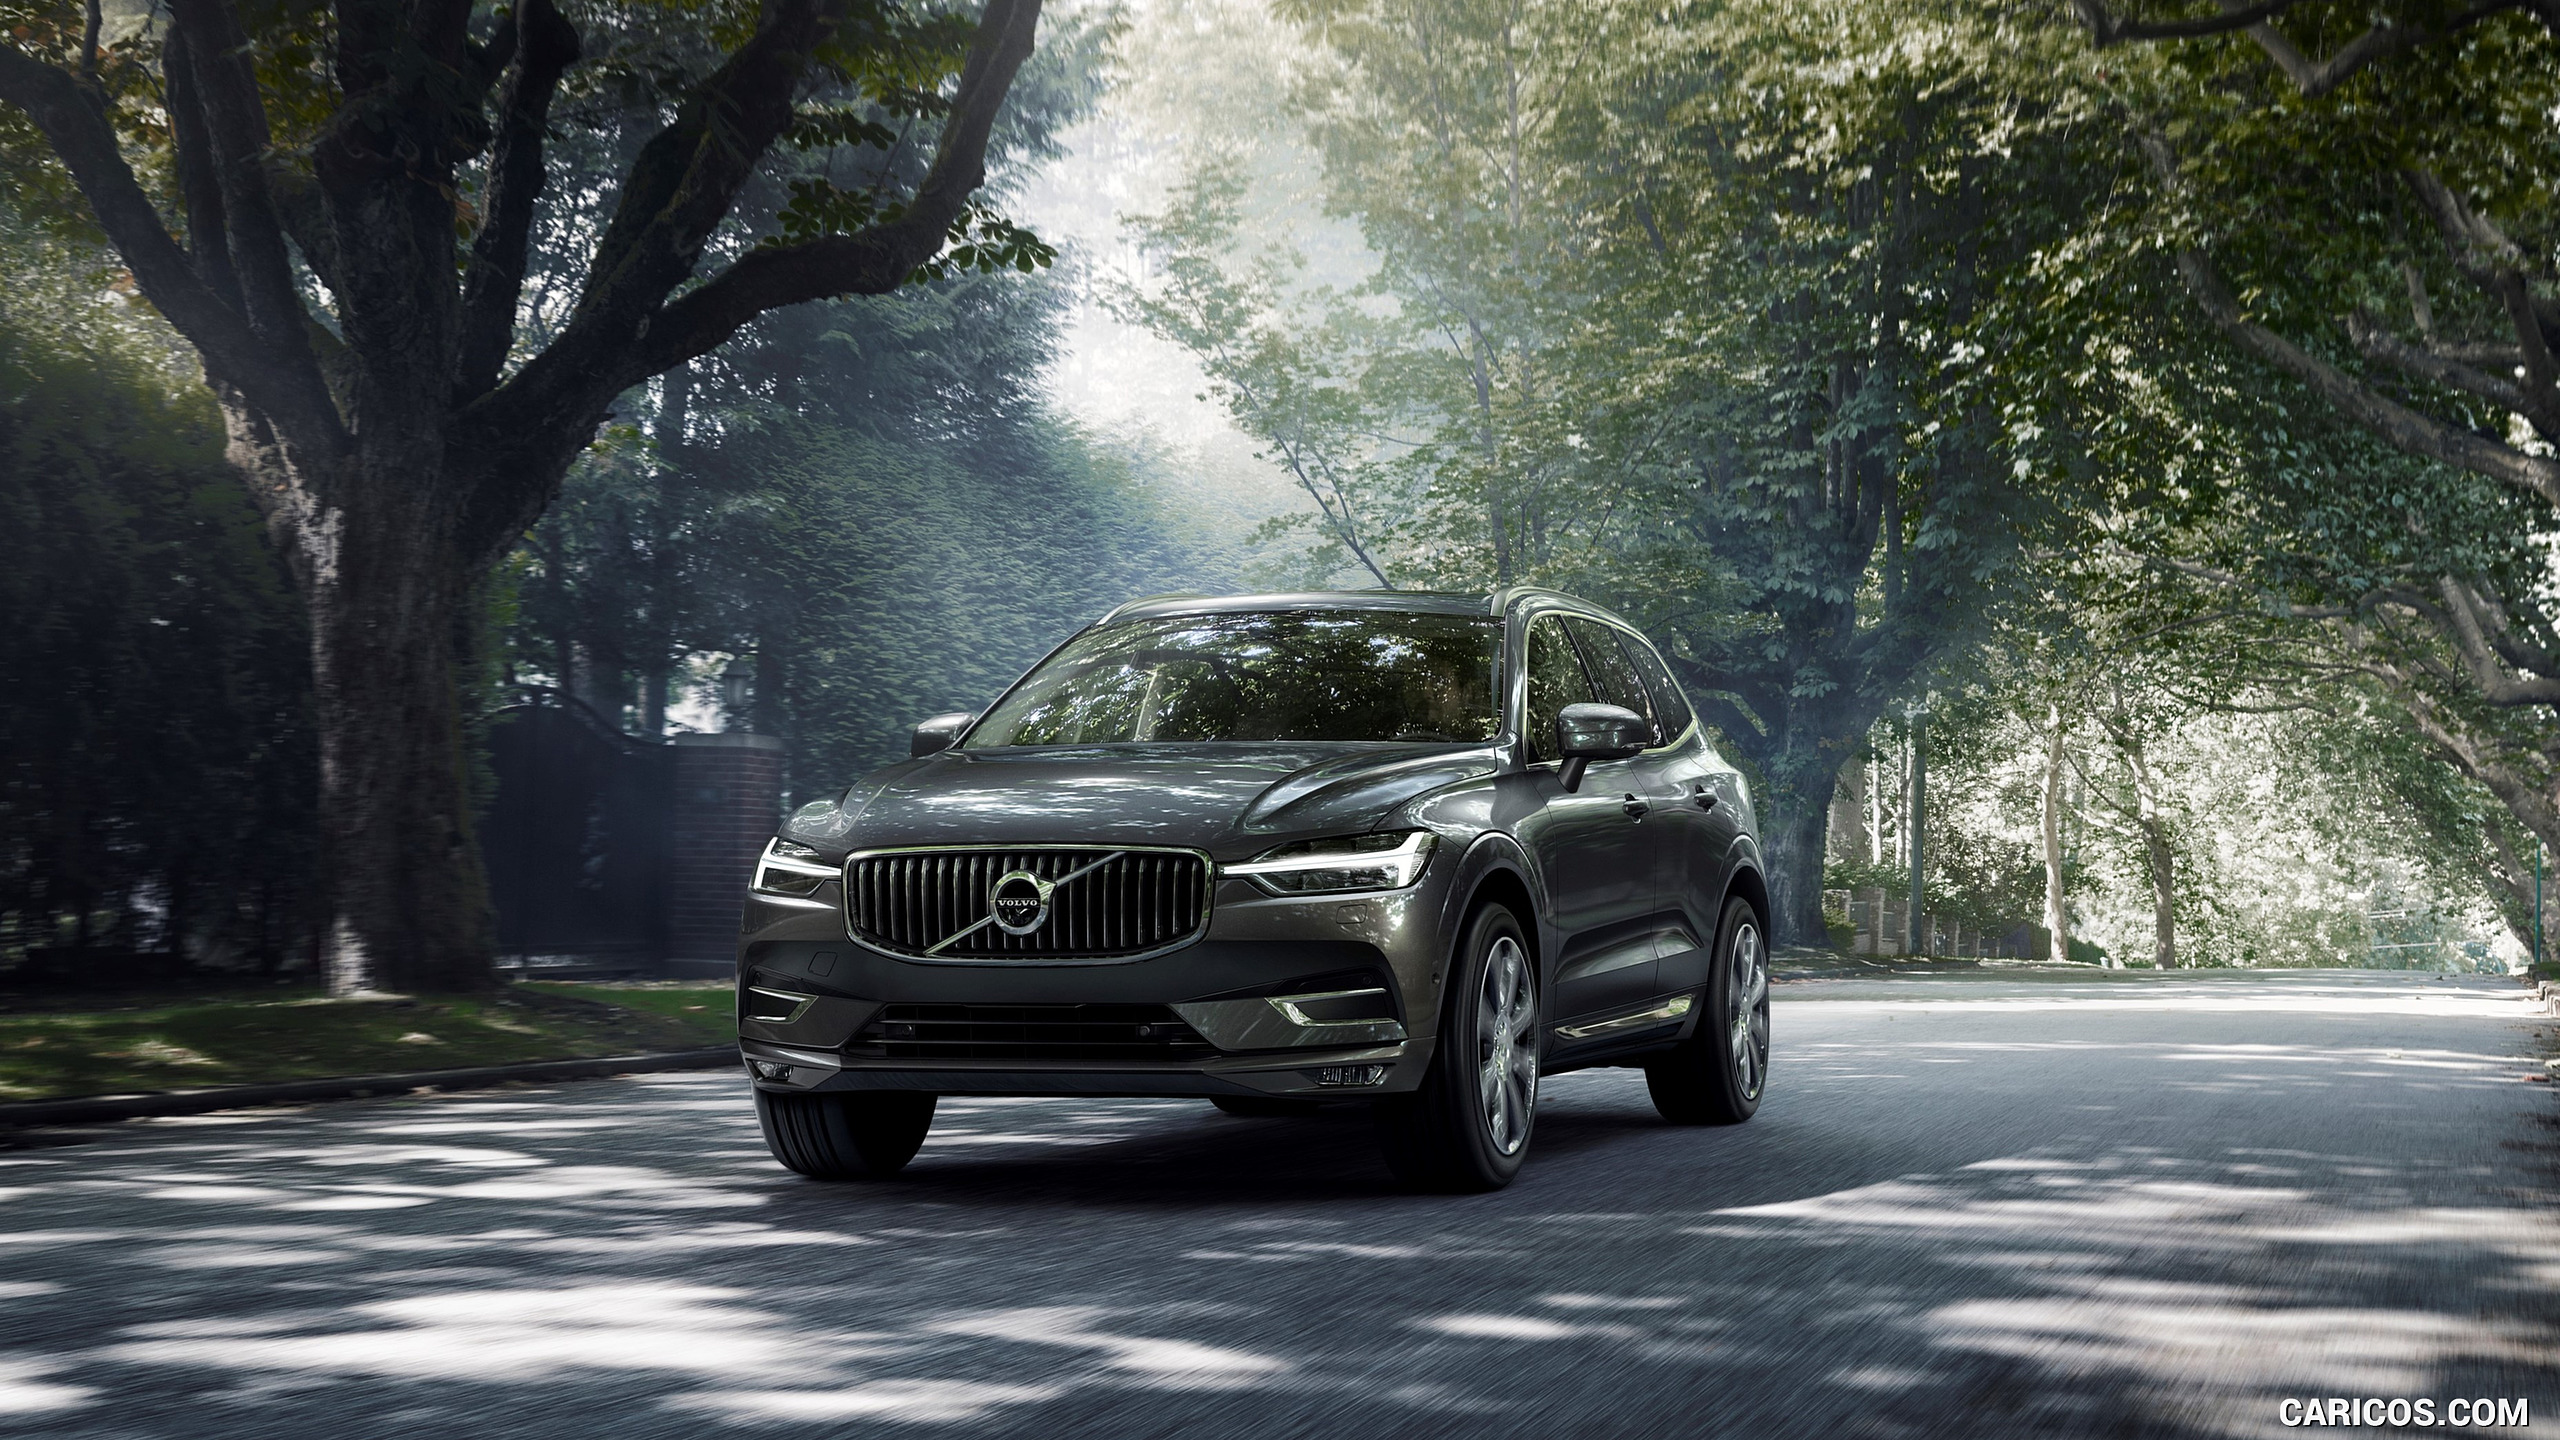 Volvo XC60 Wallpapers - Wallpaper Cave